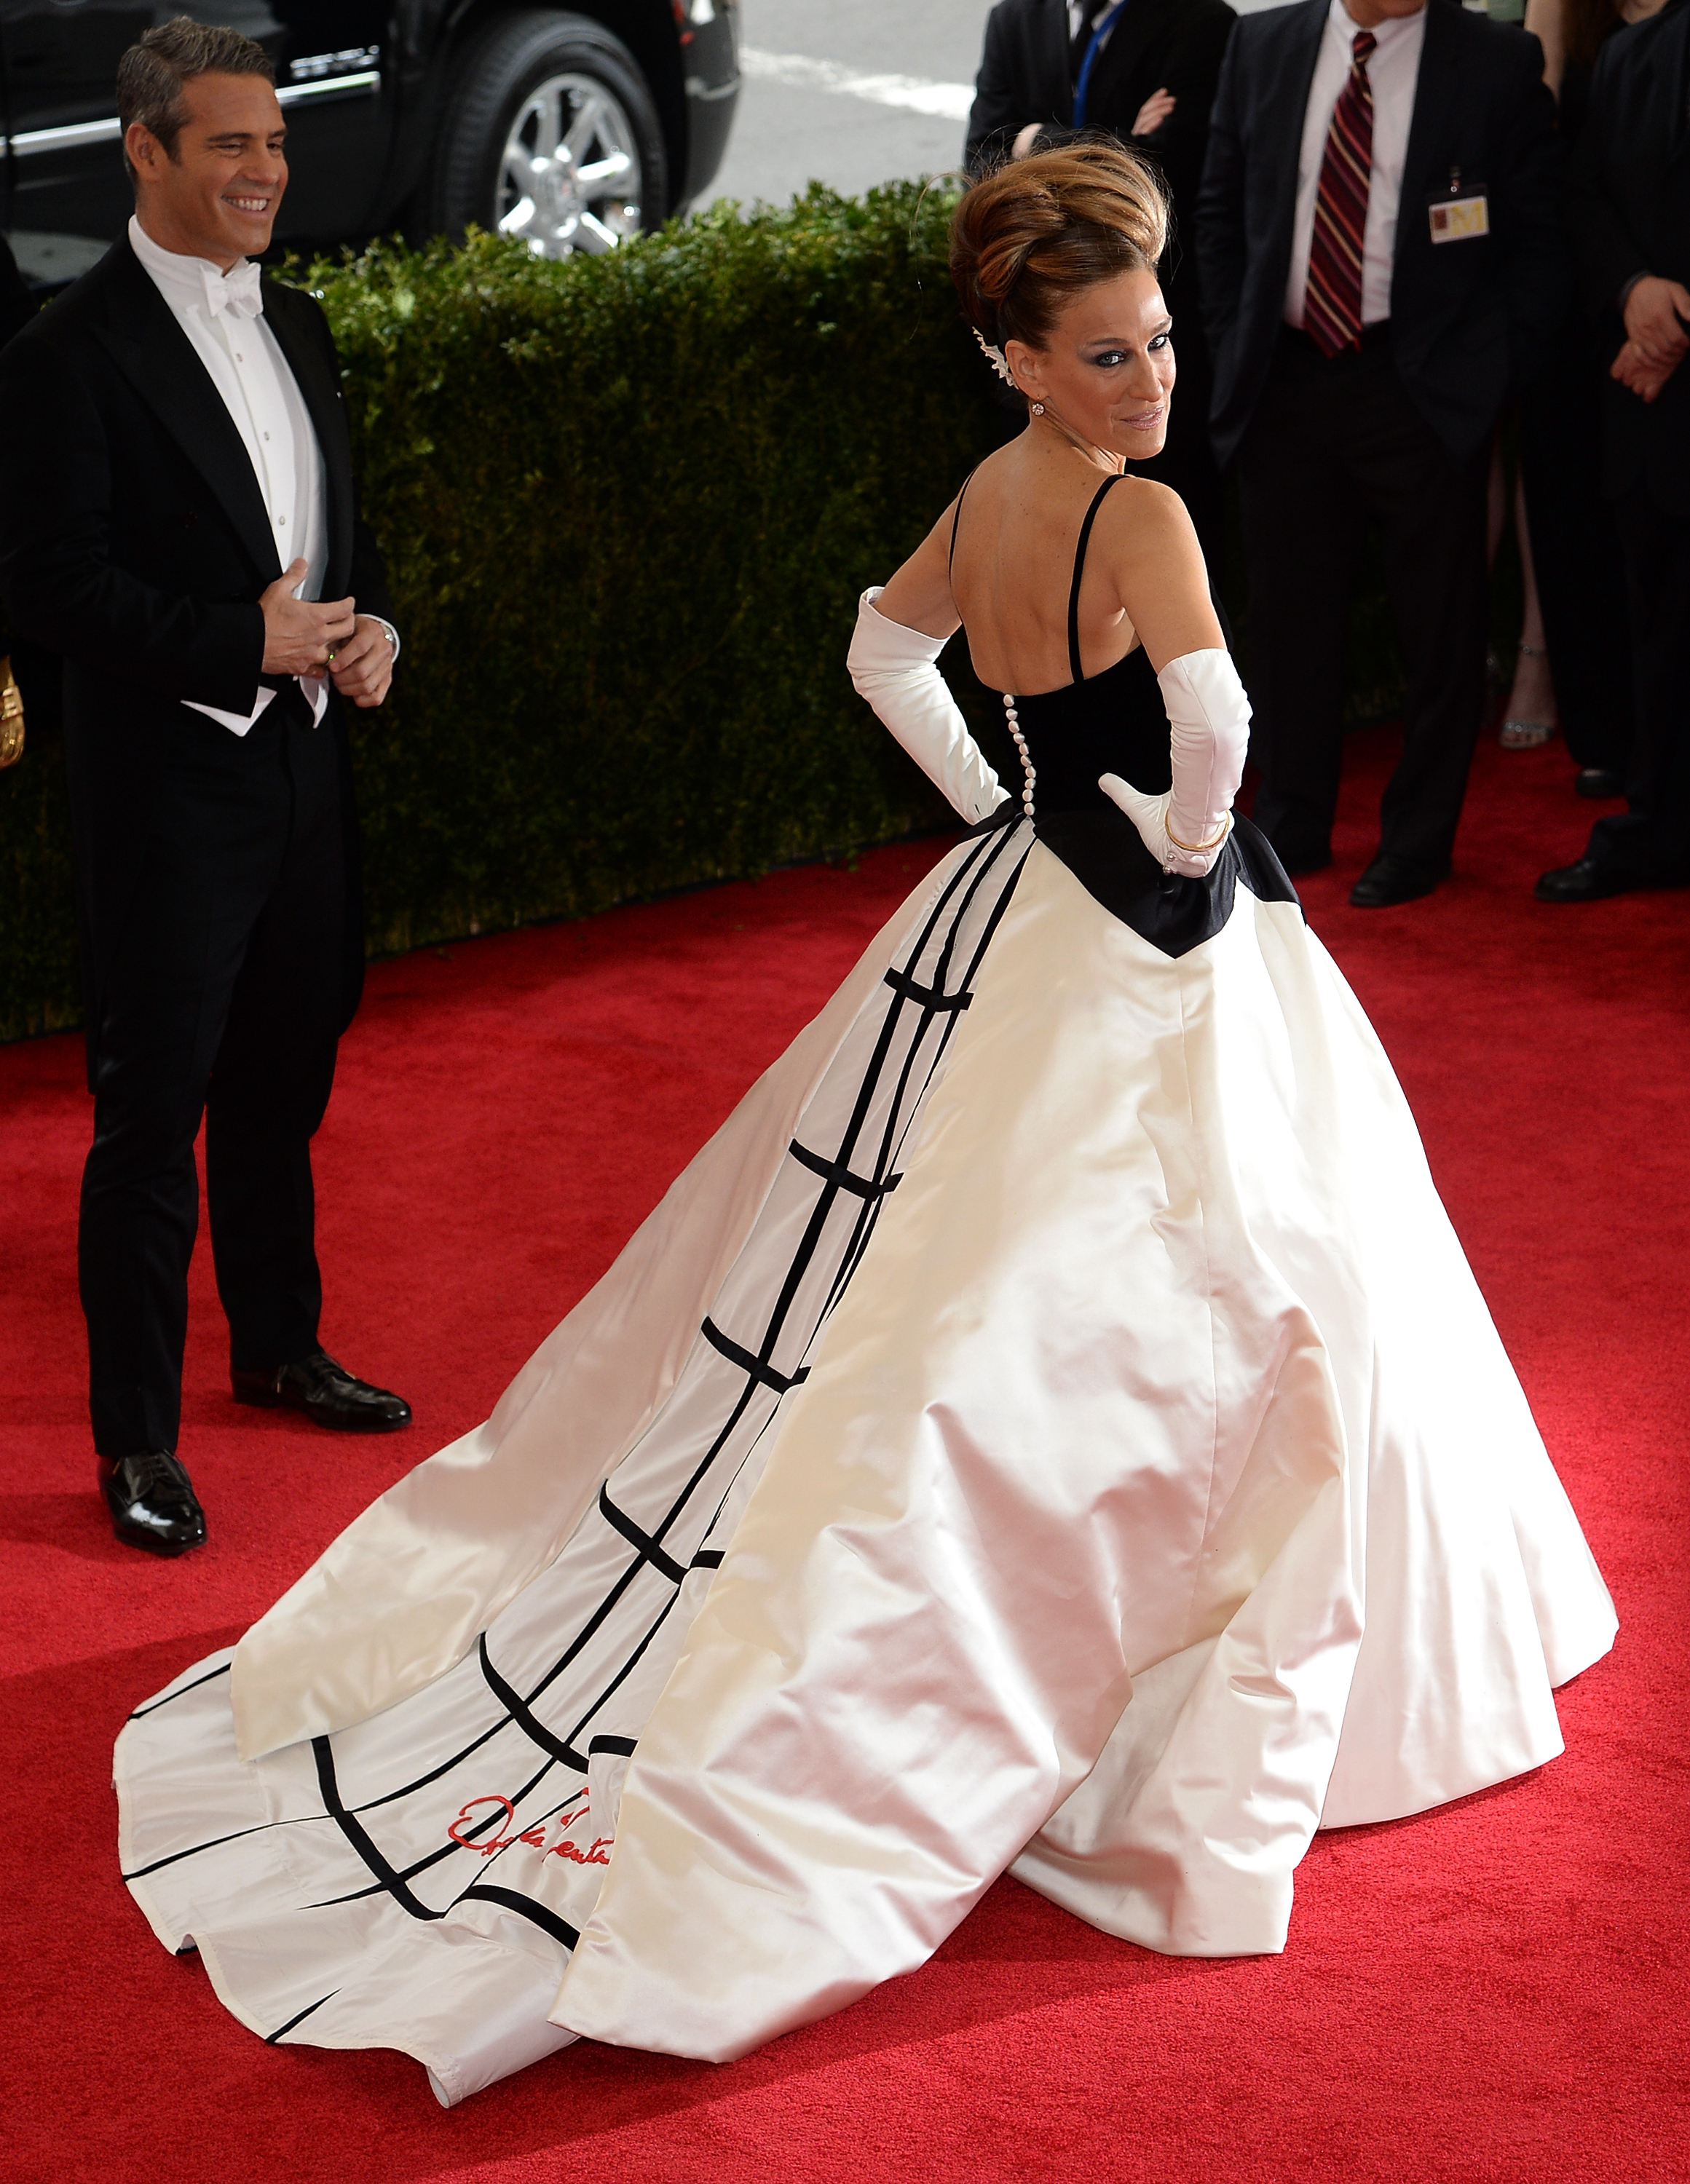 Sarah Jessica Parker attends the Met Gala with the theme, "Charles James: Beyond Fashion," at the Metropolitan Museum of Art on May 5, 2014, in New York City. | Source: Getty Images